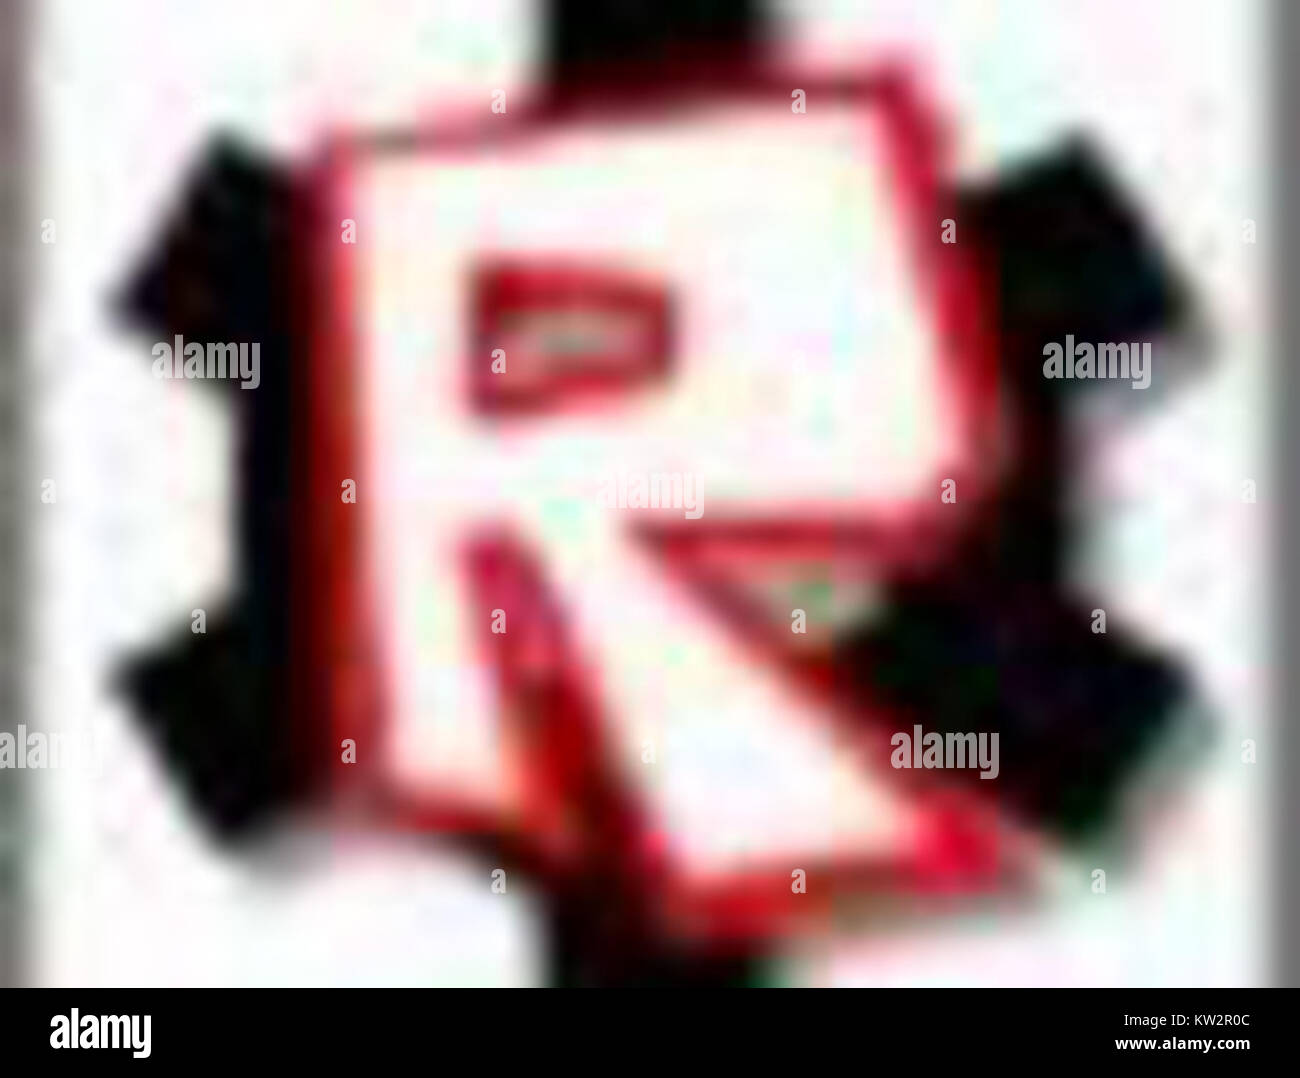 Roblox Logo Images